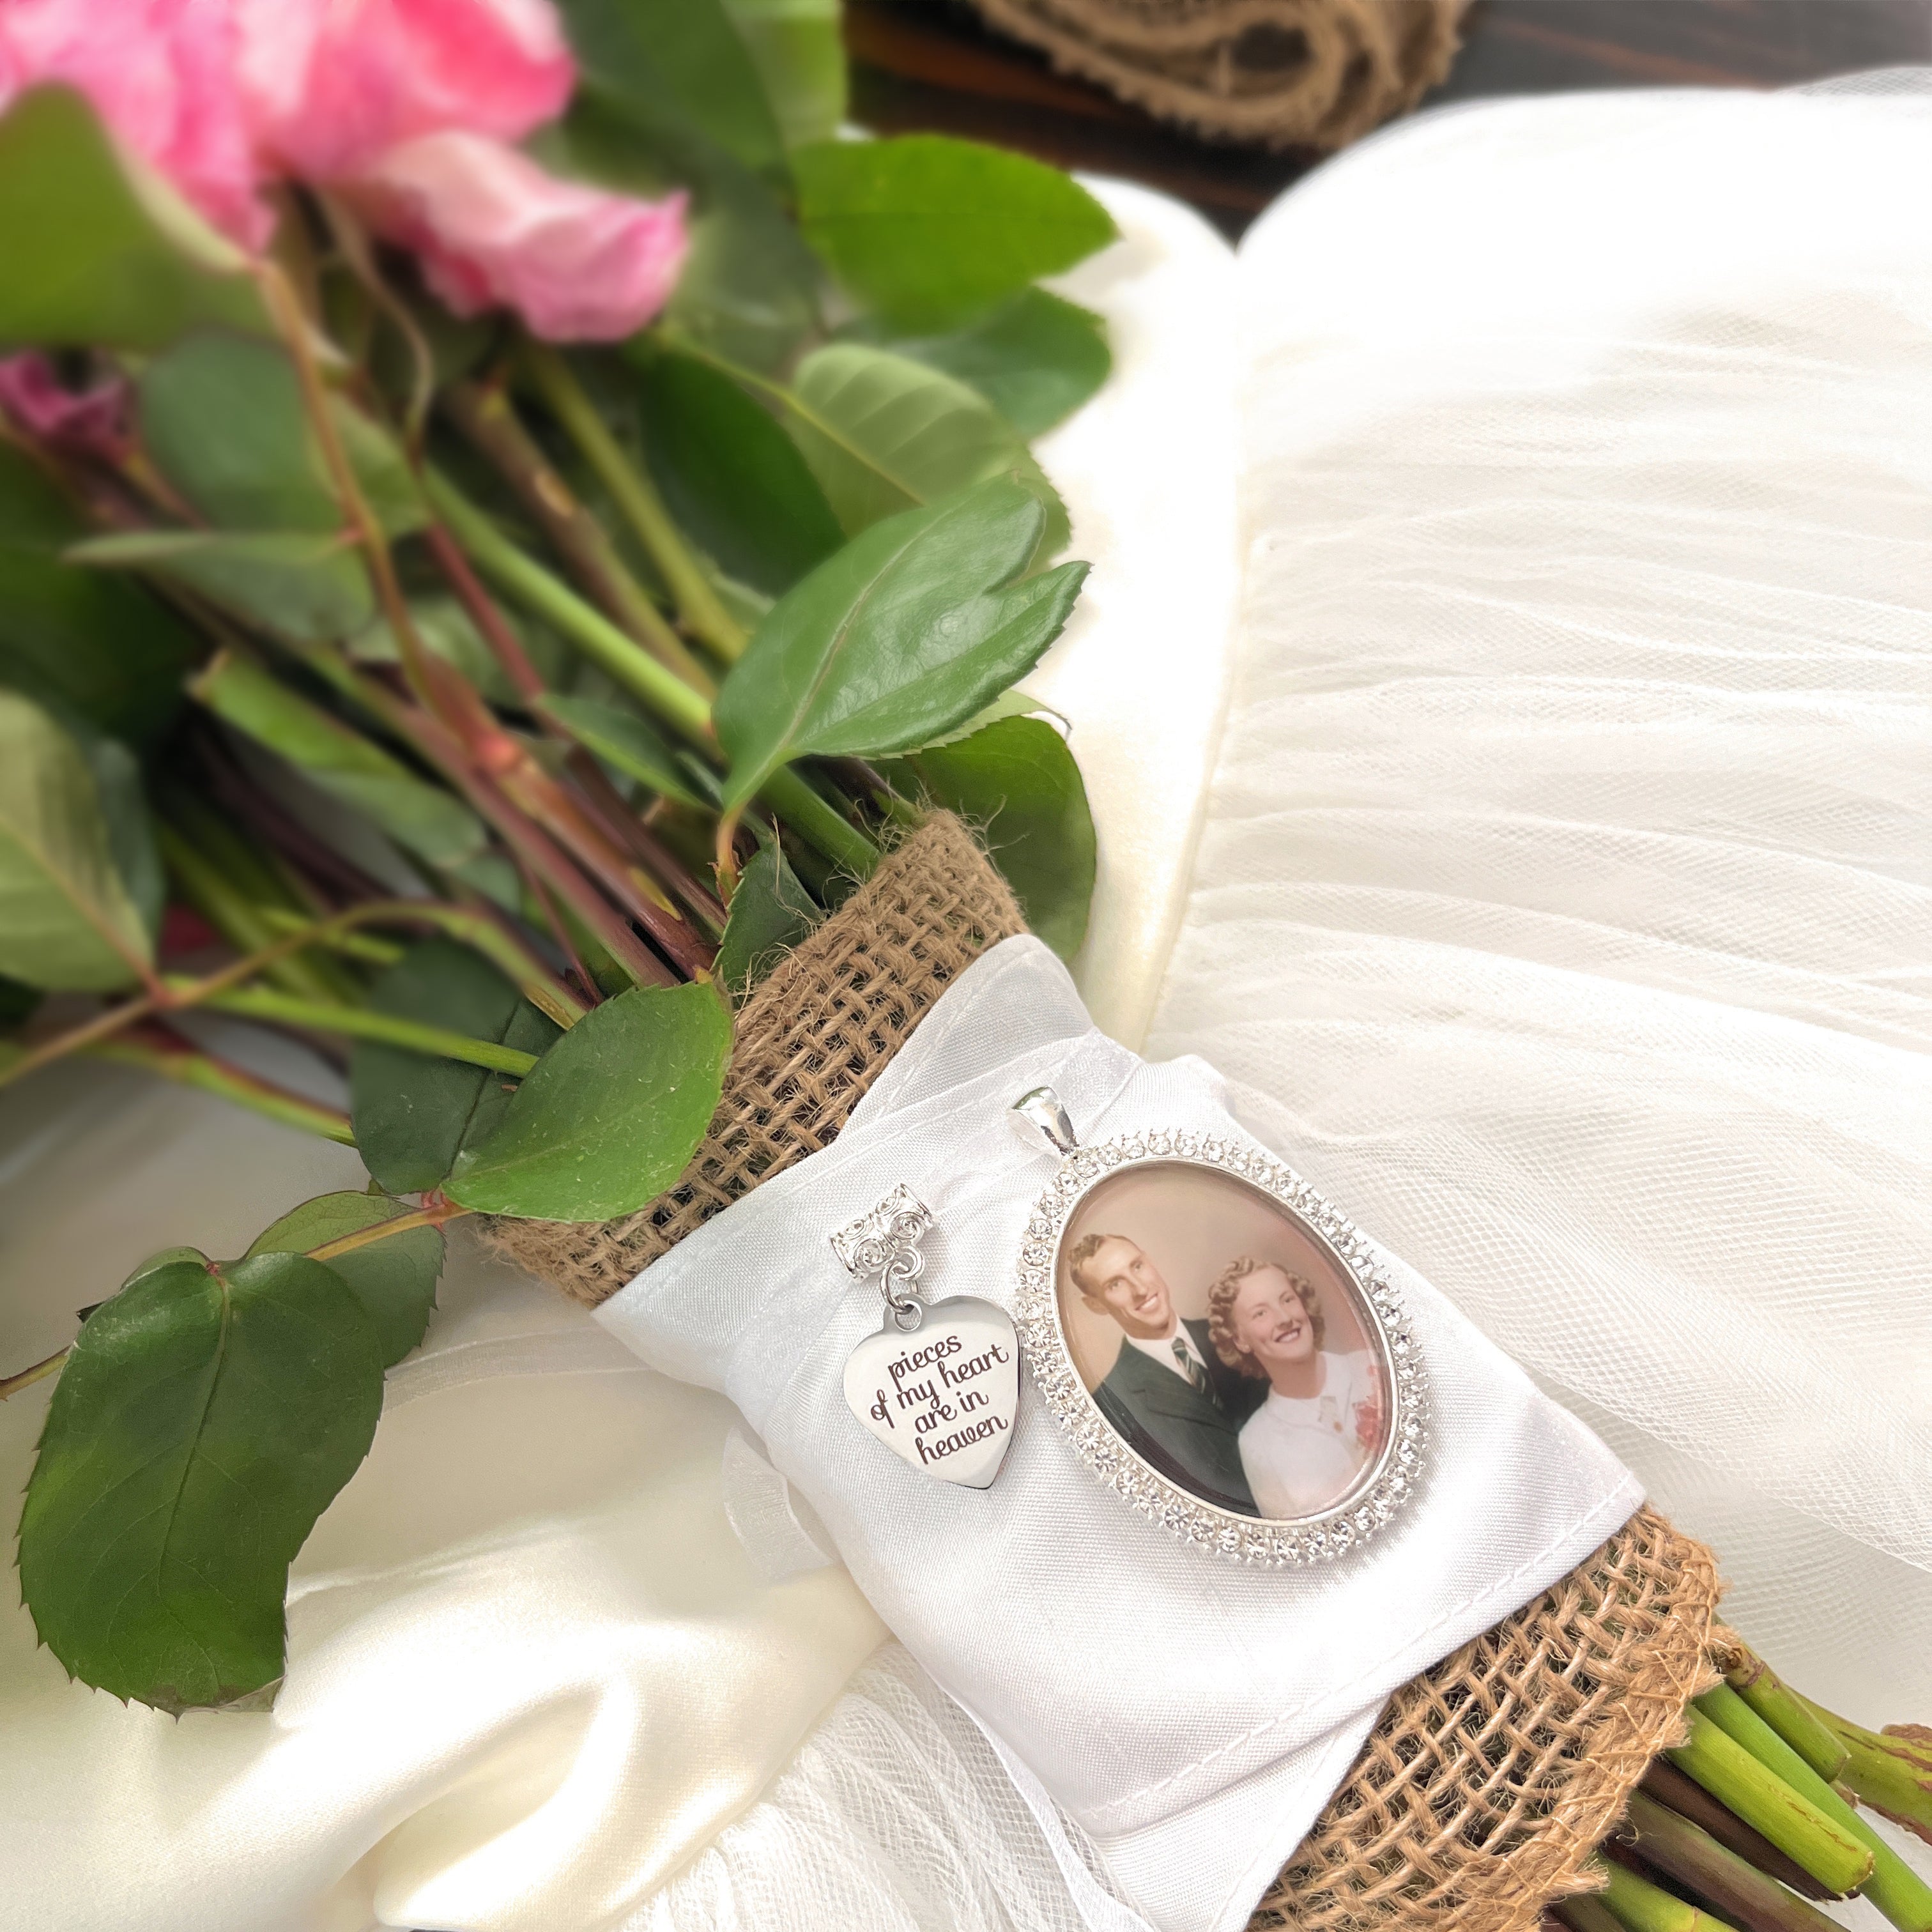 Bridal Memorial Photo Bouquet Charm in oval shape with clear rhinestones around edge of pendant. Image size is roughly 30mmx40mm. Comes with heart shape charm that reads, pieces of my heart are in heaven. Pendant and charm come on a white ribbon to attach to bridal bouquet.